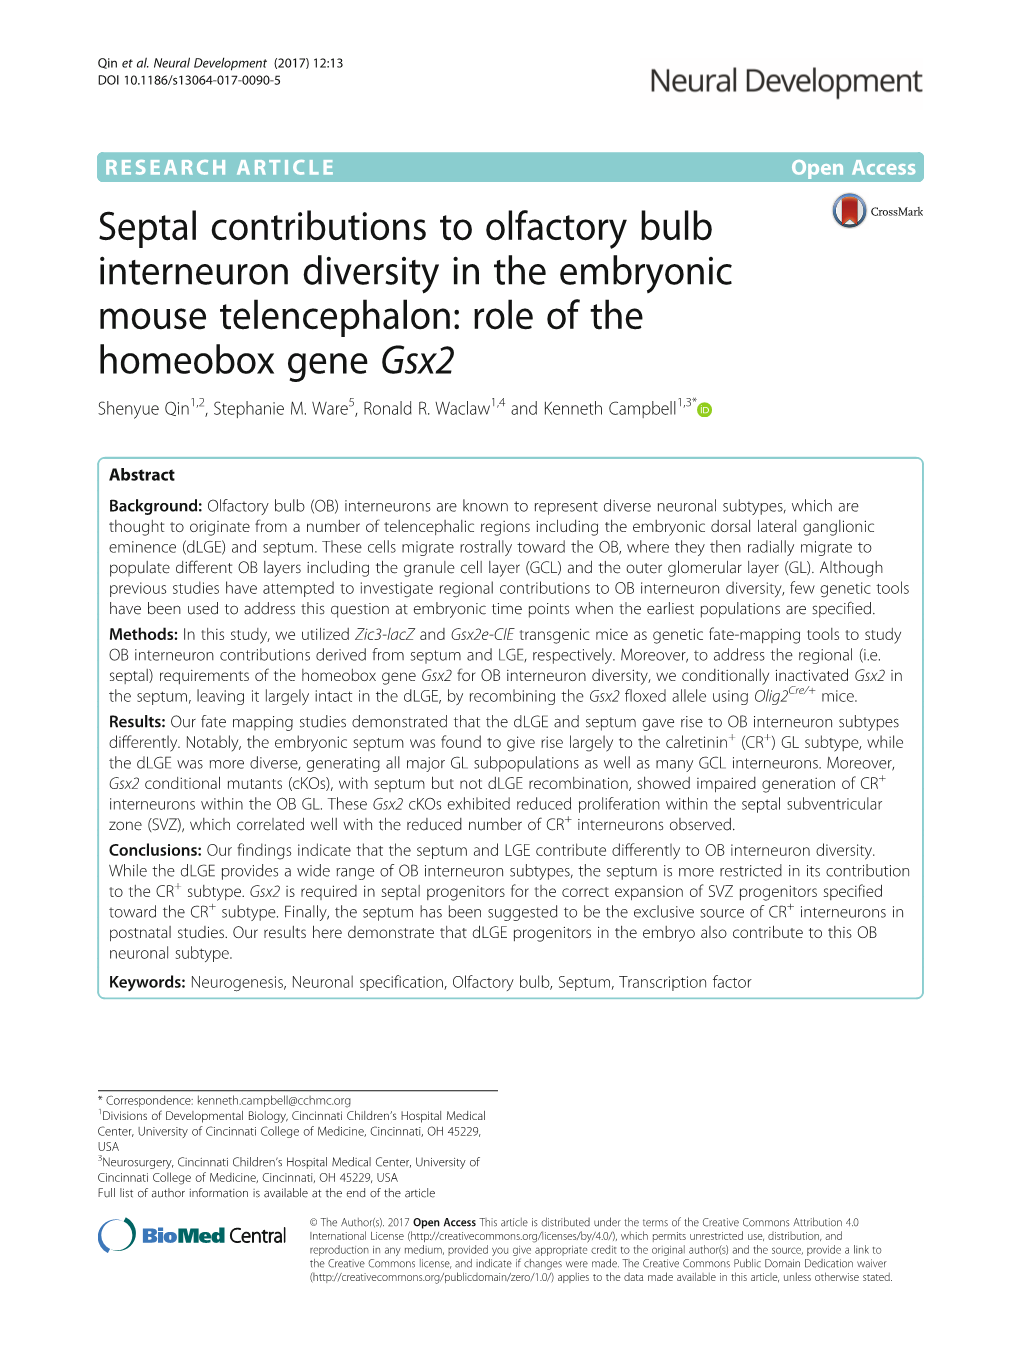 Septal Contributions to Olfactory Bulb Interneuron Diversity in the Embryonic Mouse Telencephalon: Role of the Homeobox Gene Gsx2 Shenyue Qin1,2, Stephanie M